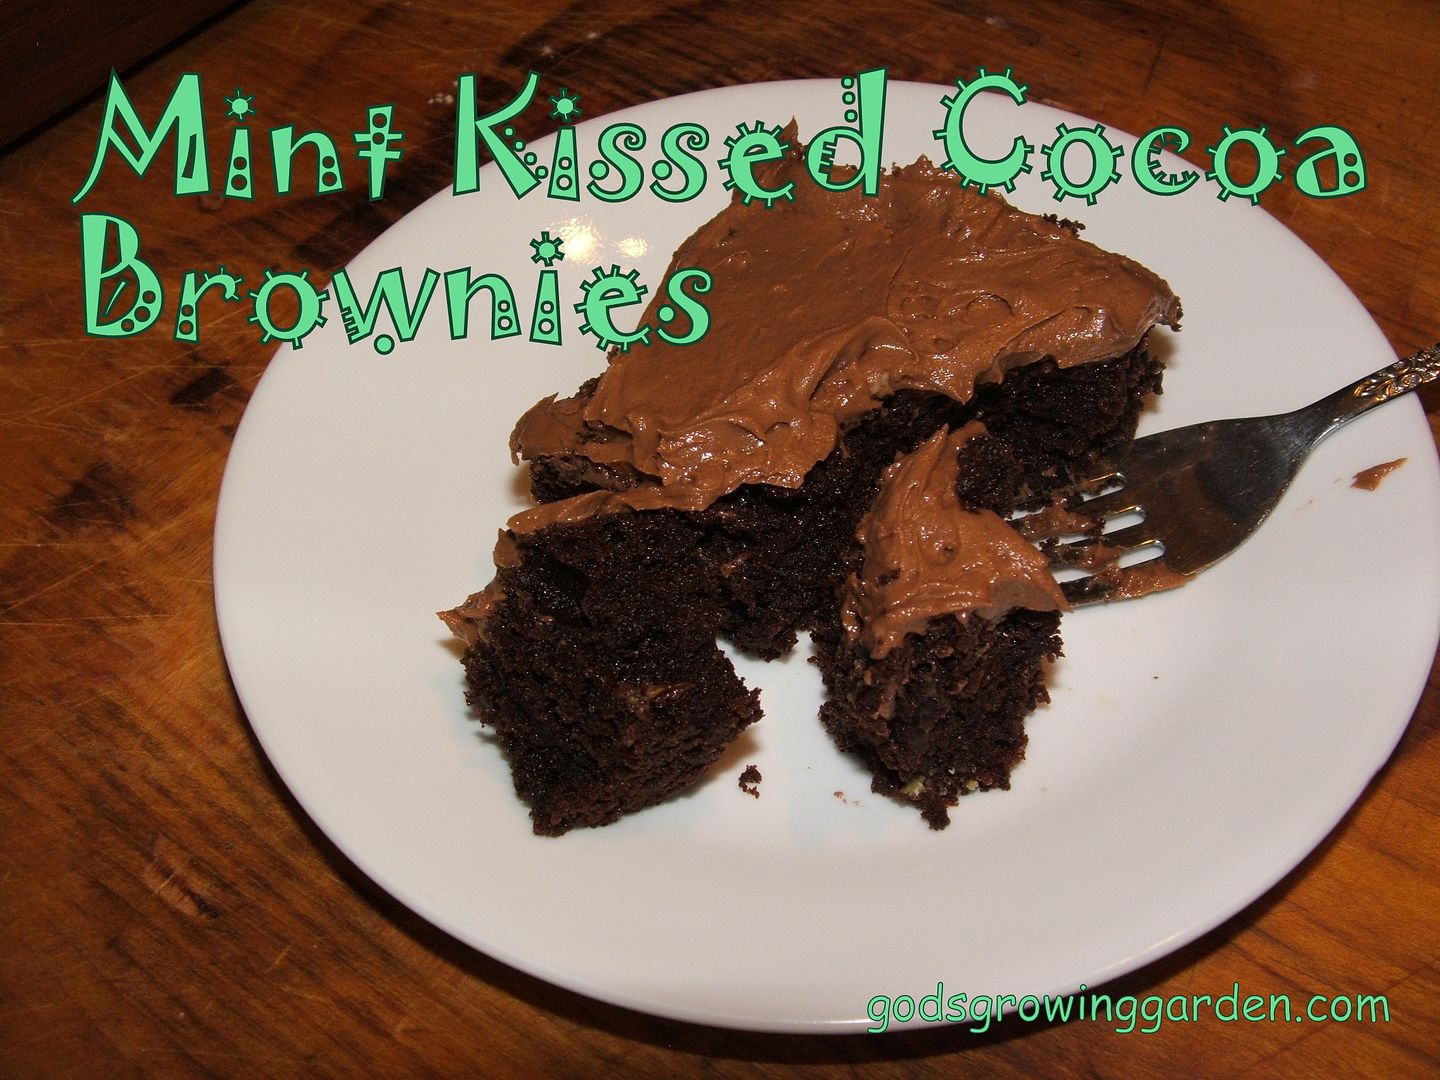 Mint Kissed Cocoa Brownies by Angie Ouellette-Tower for godsgrowinggarden.com photo 011_zps14e6198b.jpg